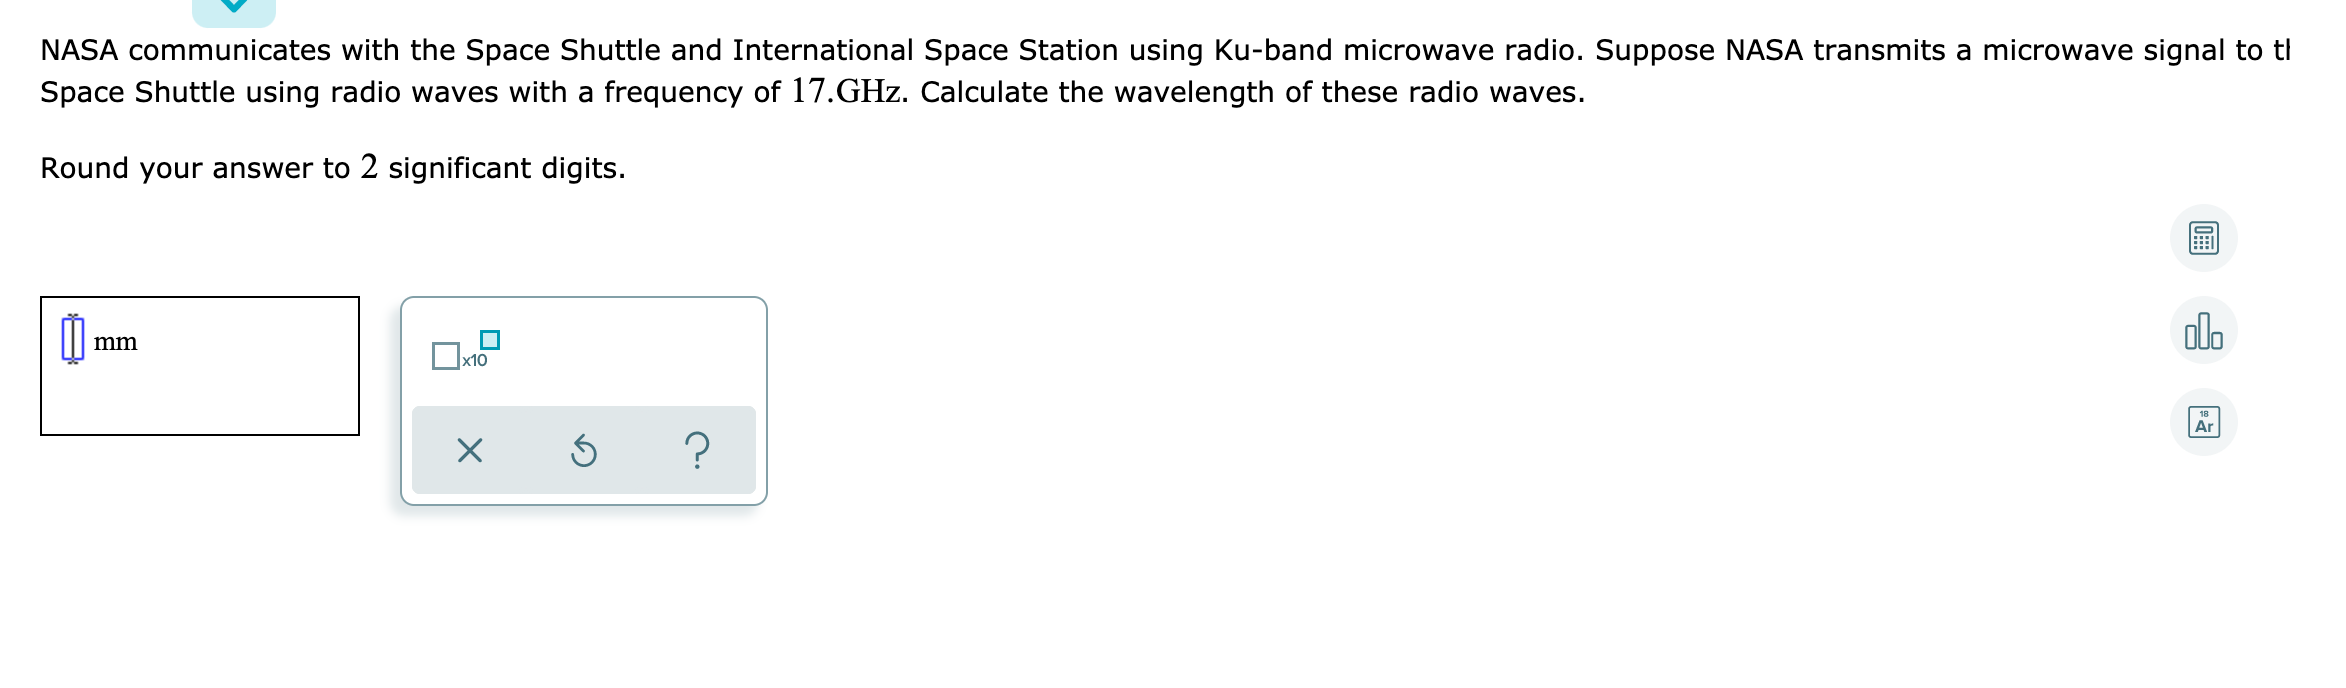 NASA communicates with the Space Shuttle and International Space Station using Ku-band microwave radio. Suppose NASA transmits a microwave signal to tl
Space Shuttle using radio waves with a frequency of 17.GHz. Calculate the wavelength of these radio waves.
Round your answer to 2 significant digits.
